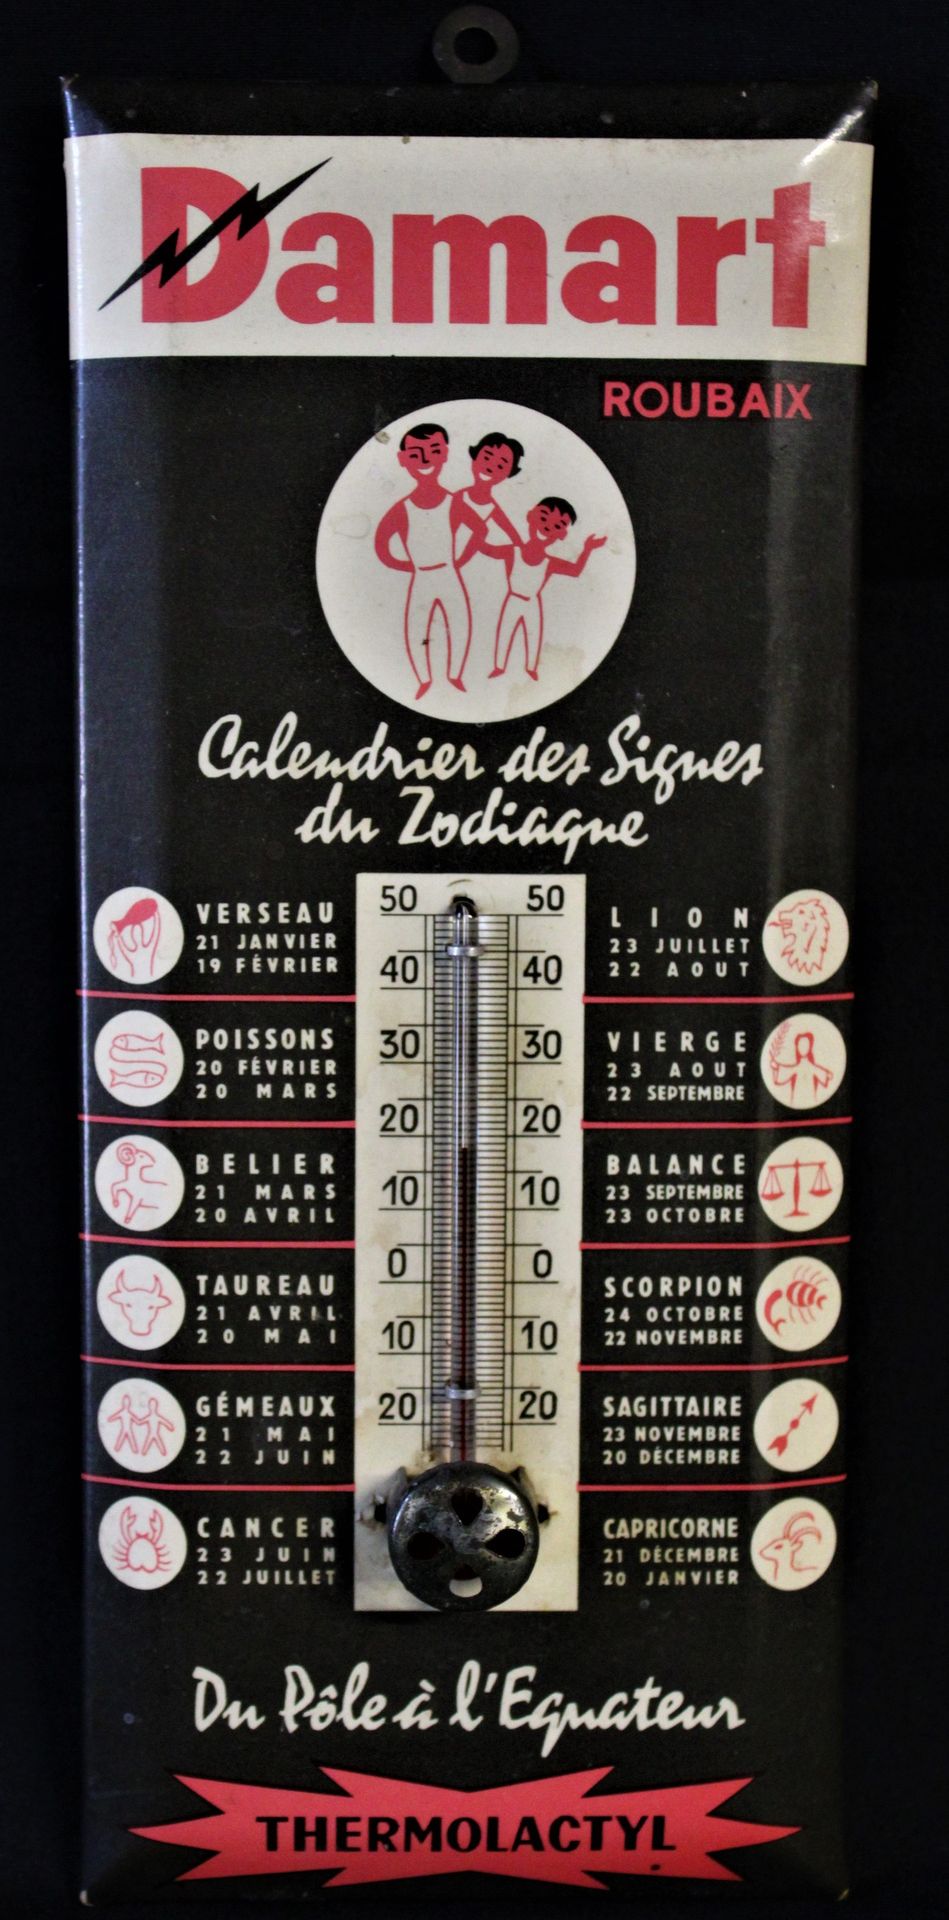 Null Thermometer "DAMART ROUBAIX calendar of the signs of the Zodiac THERMOLACTY&hellip;